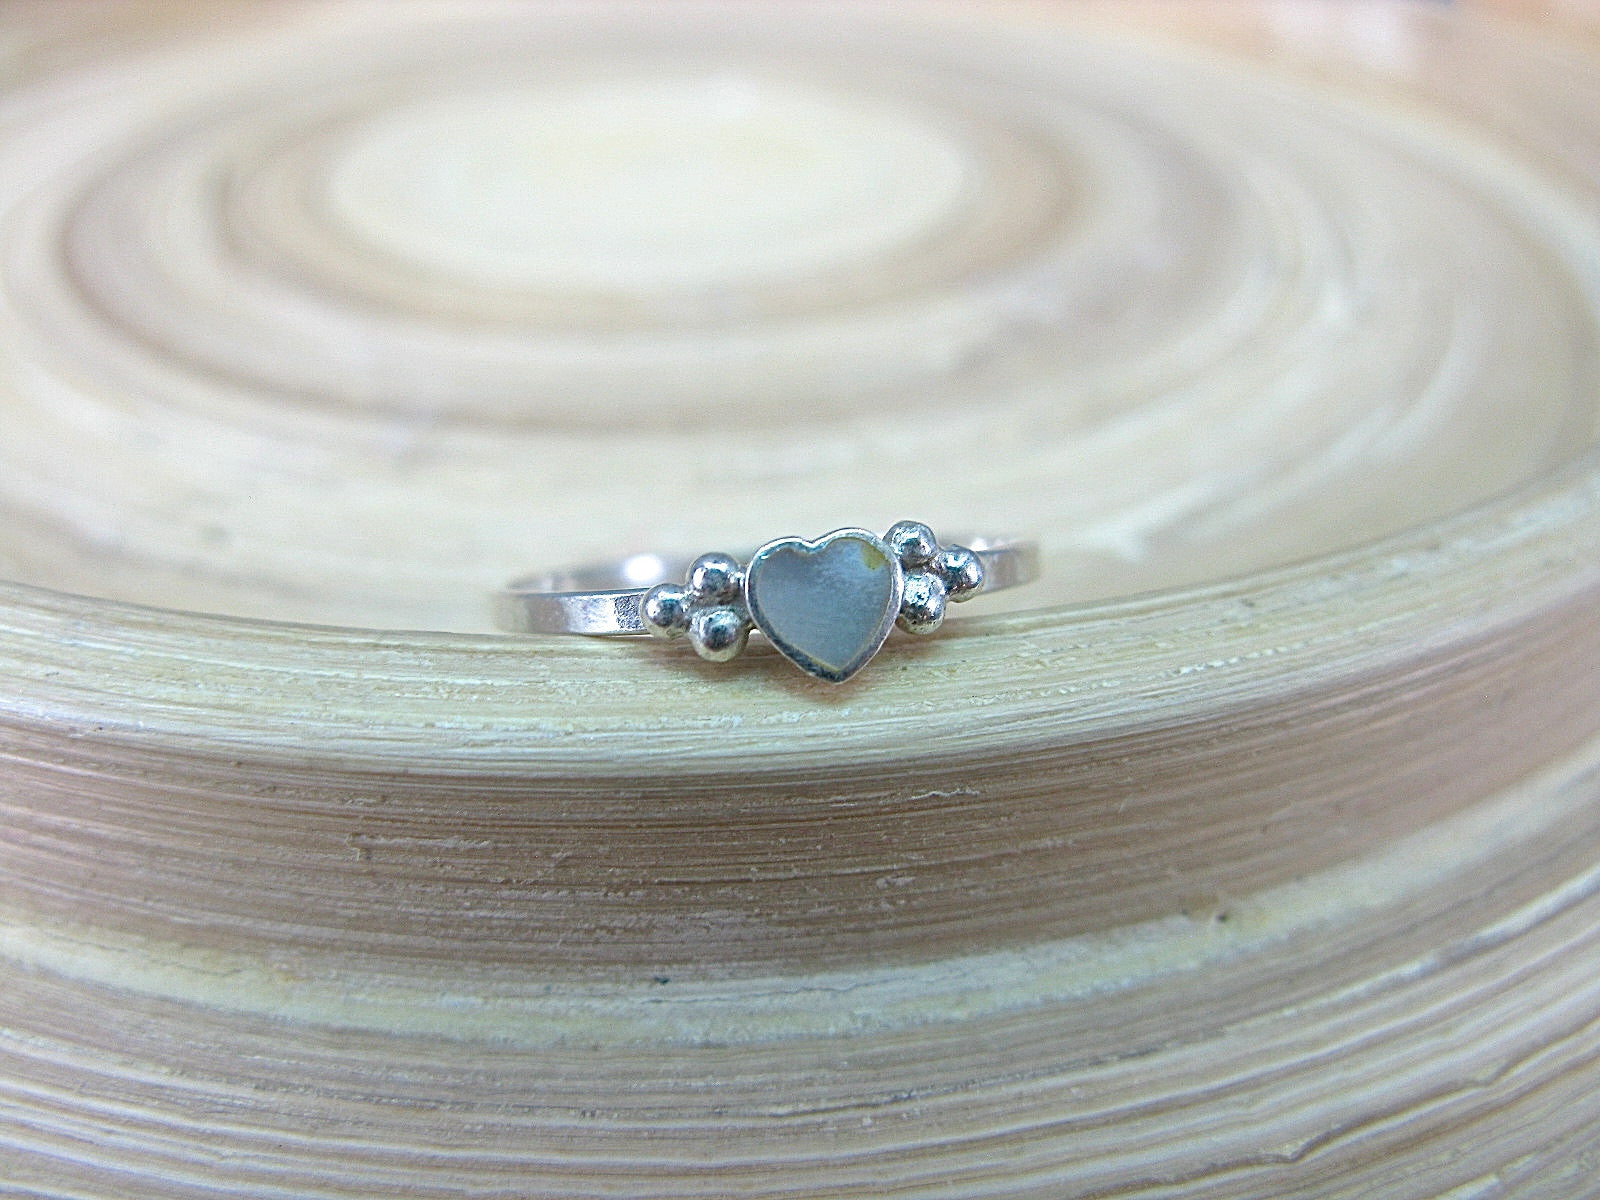 Mother of Pearl Heart Ring Minimalist Jewlery in 925 Sterling Silver Ring Faith Owl - Faith Owl